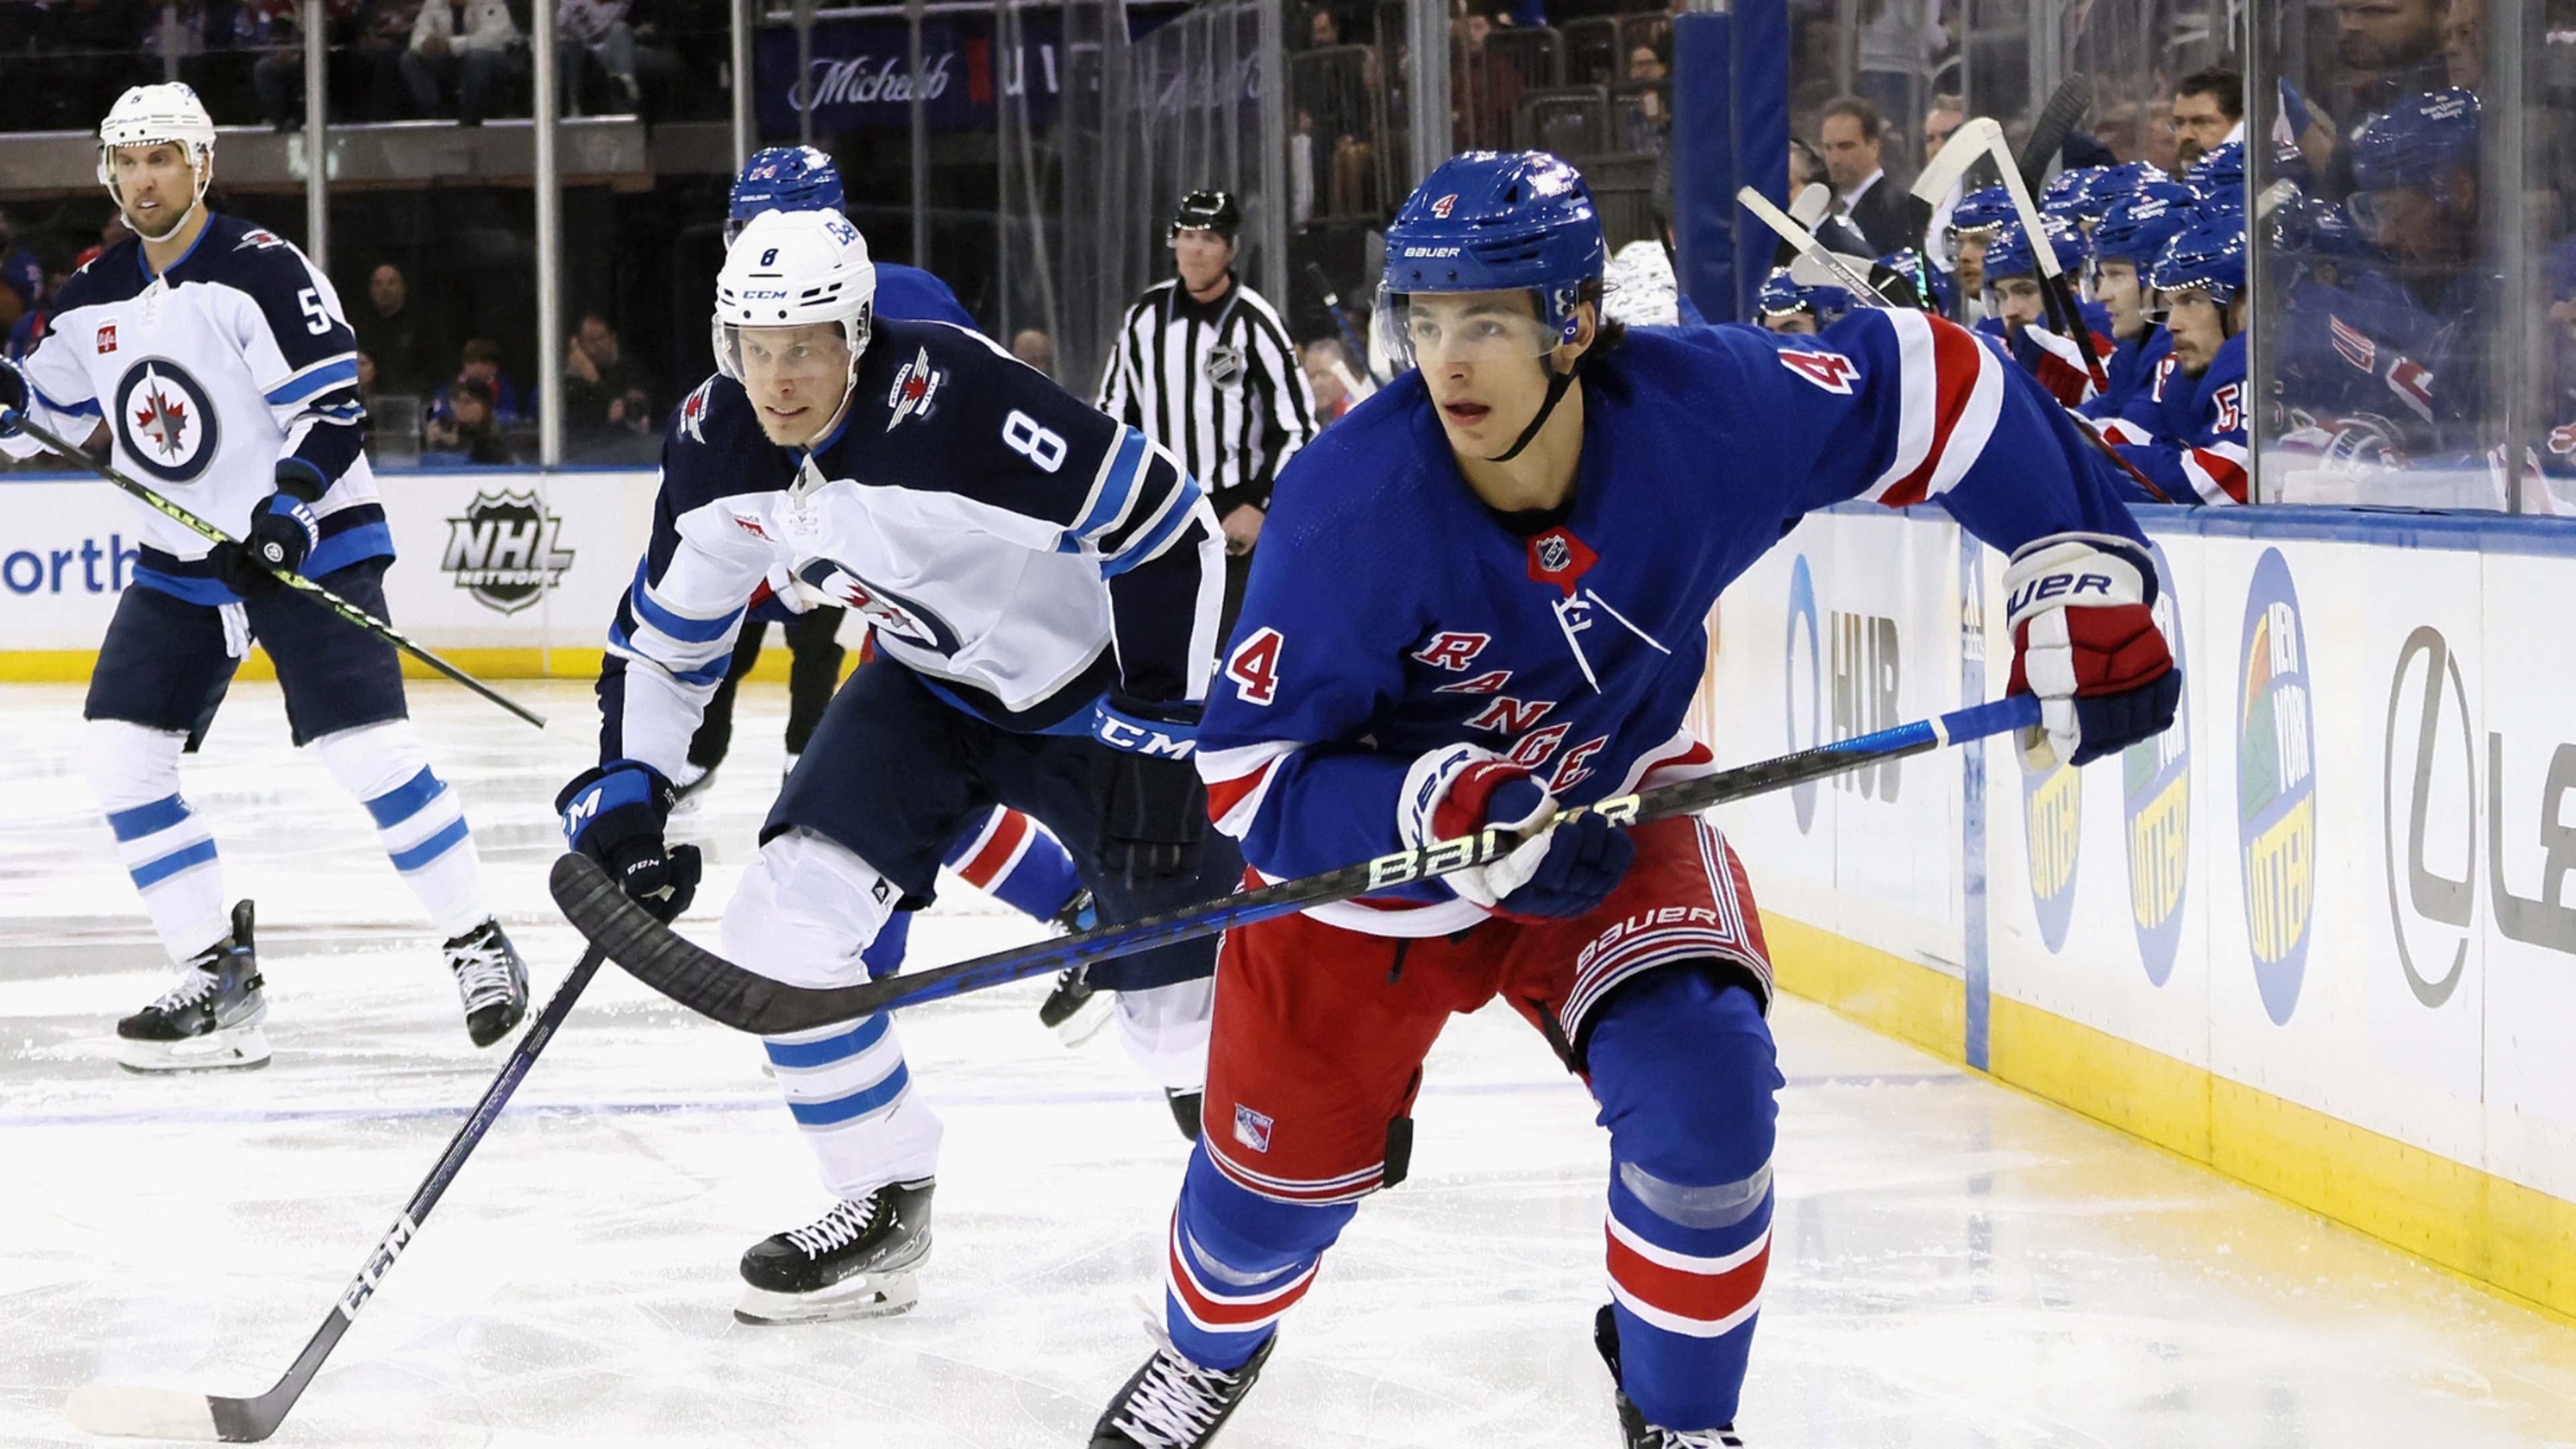 How to watch today's New York Rangers vs Winnipeg Jets NHL game